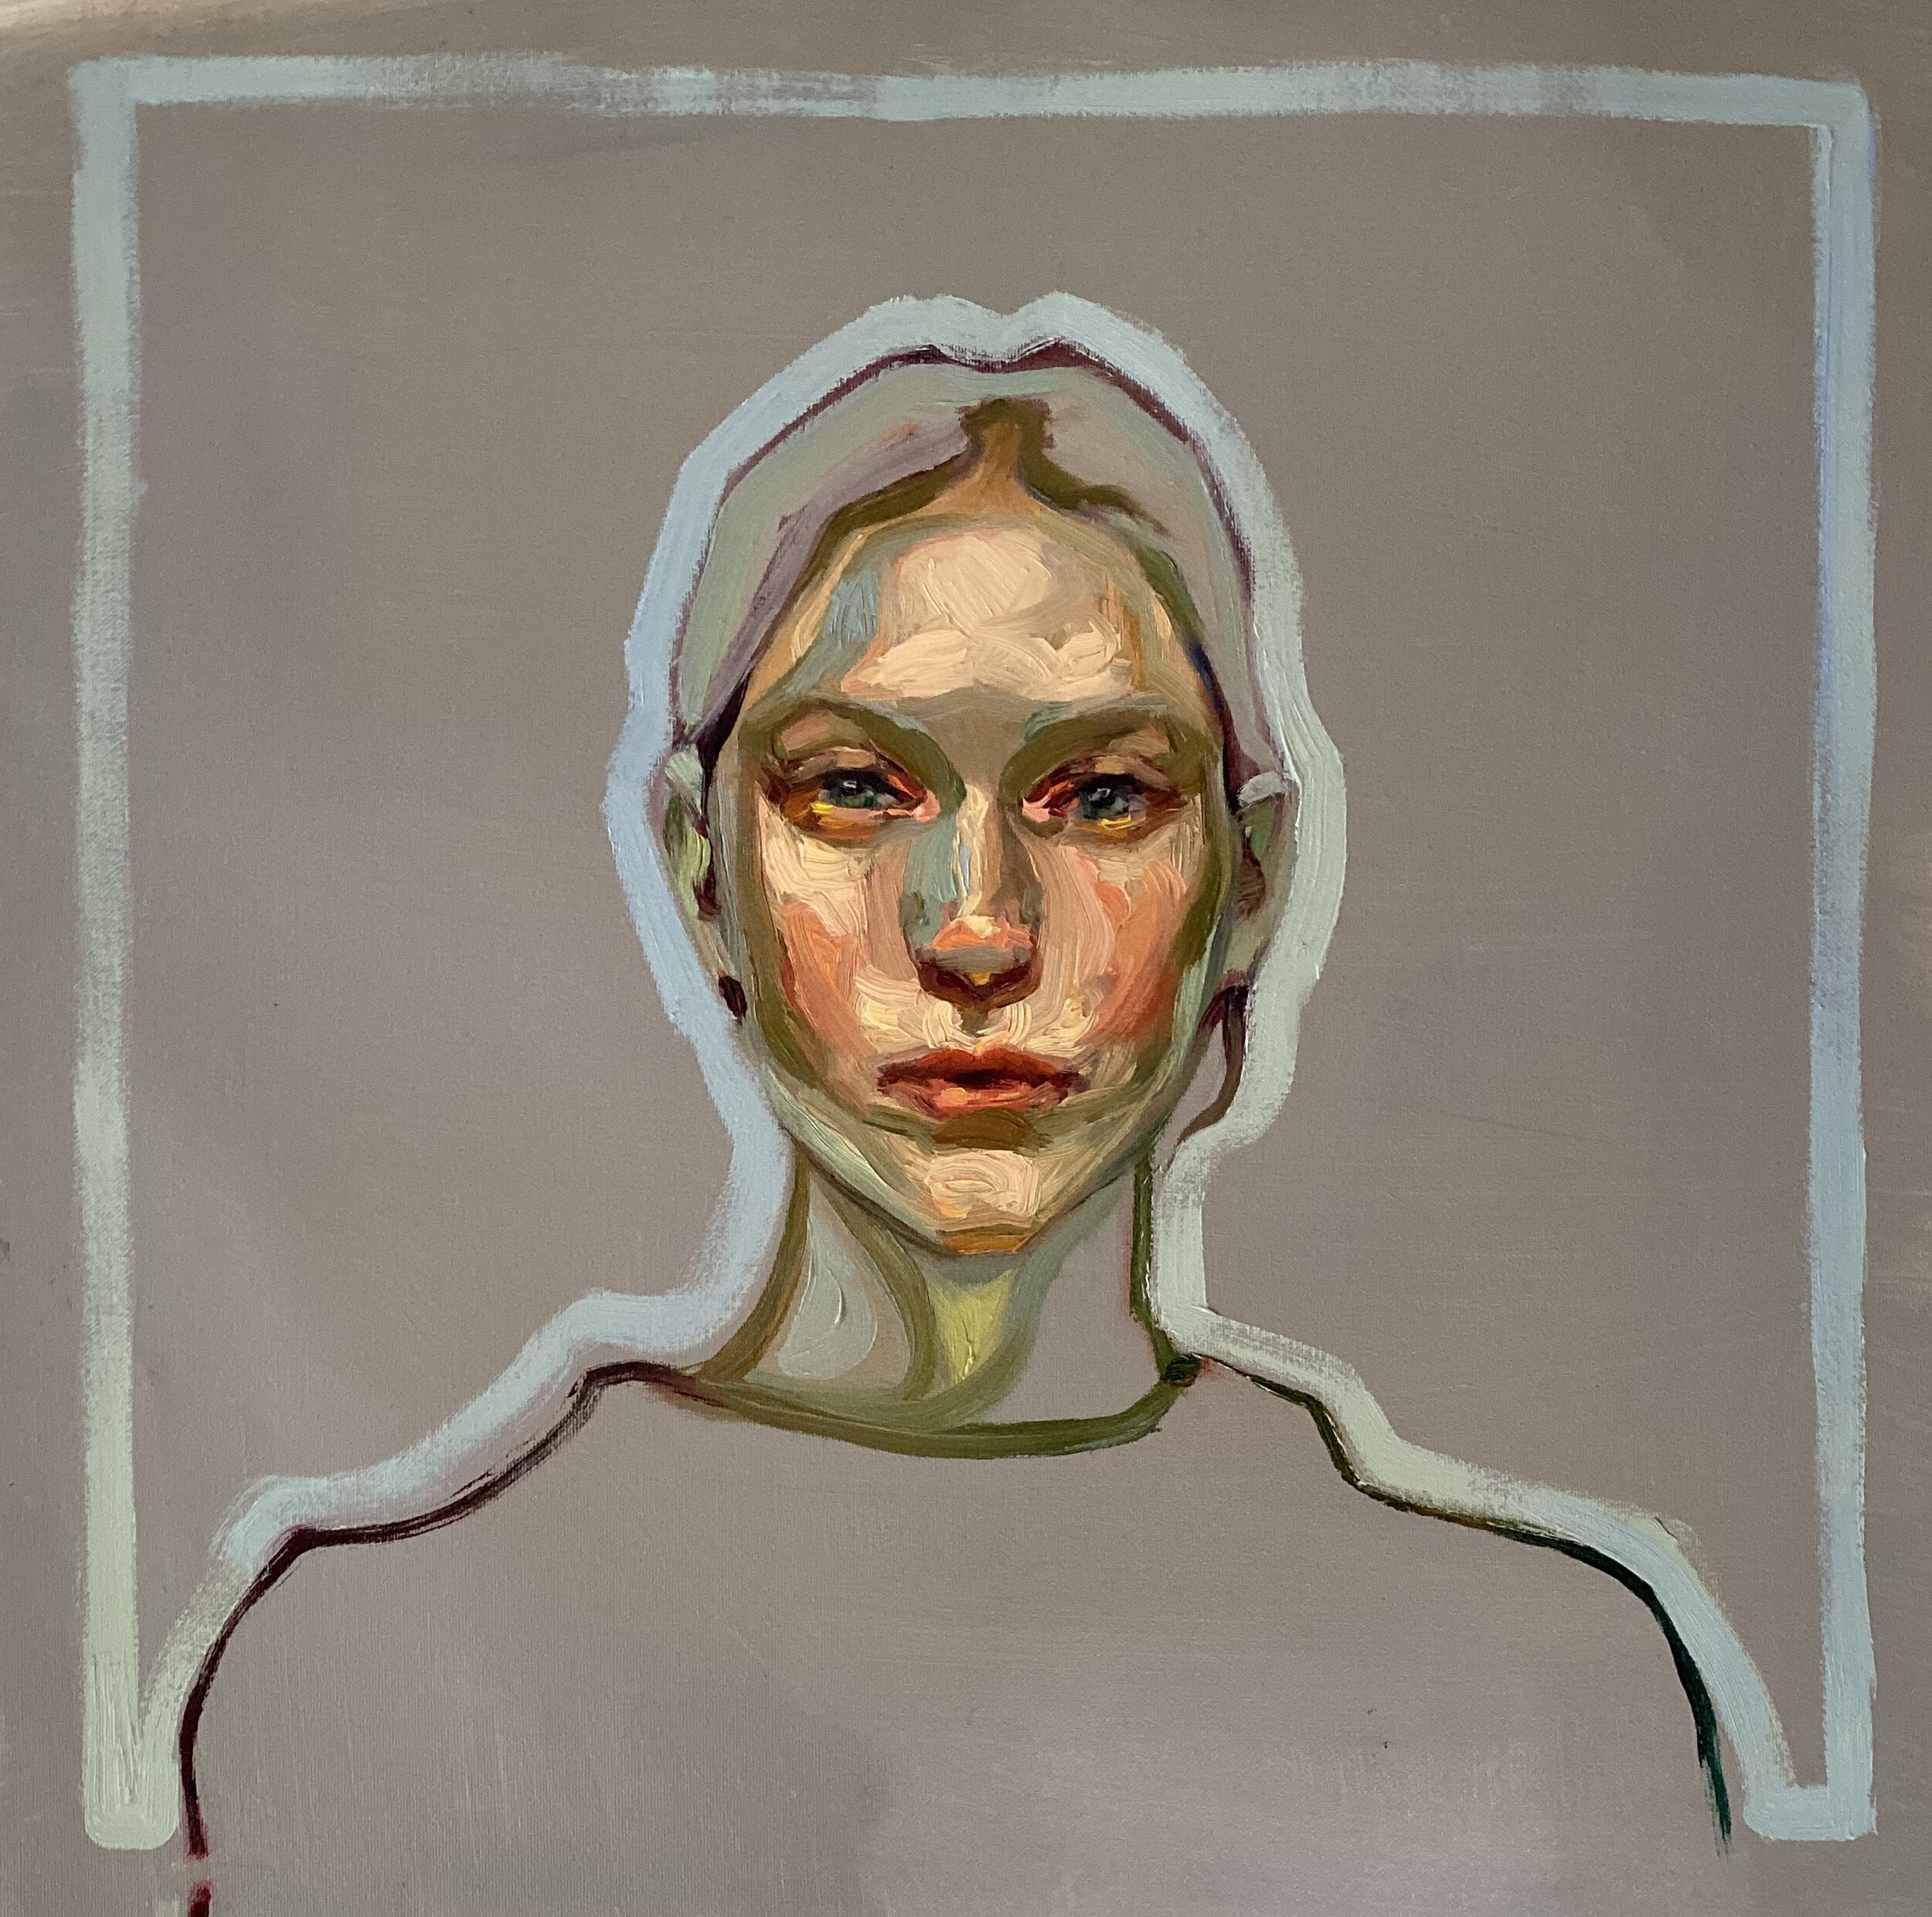 “Portrait with Silver Outline”